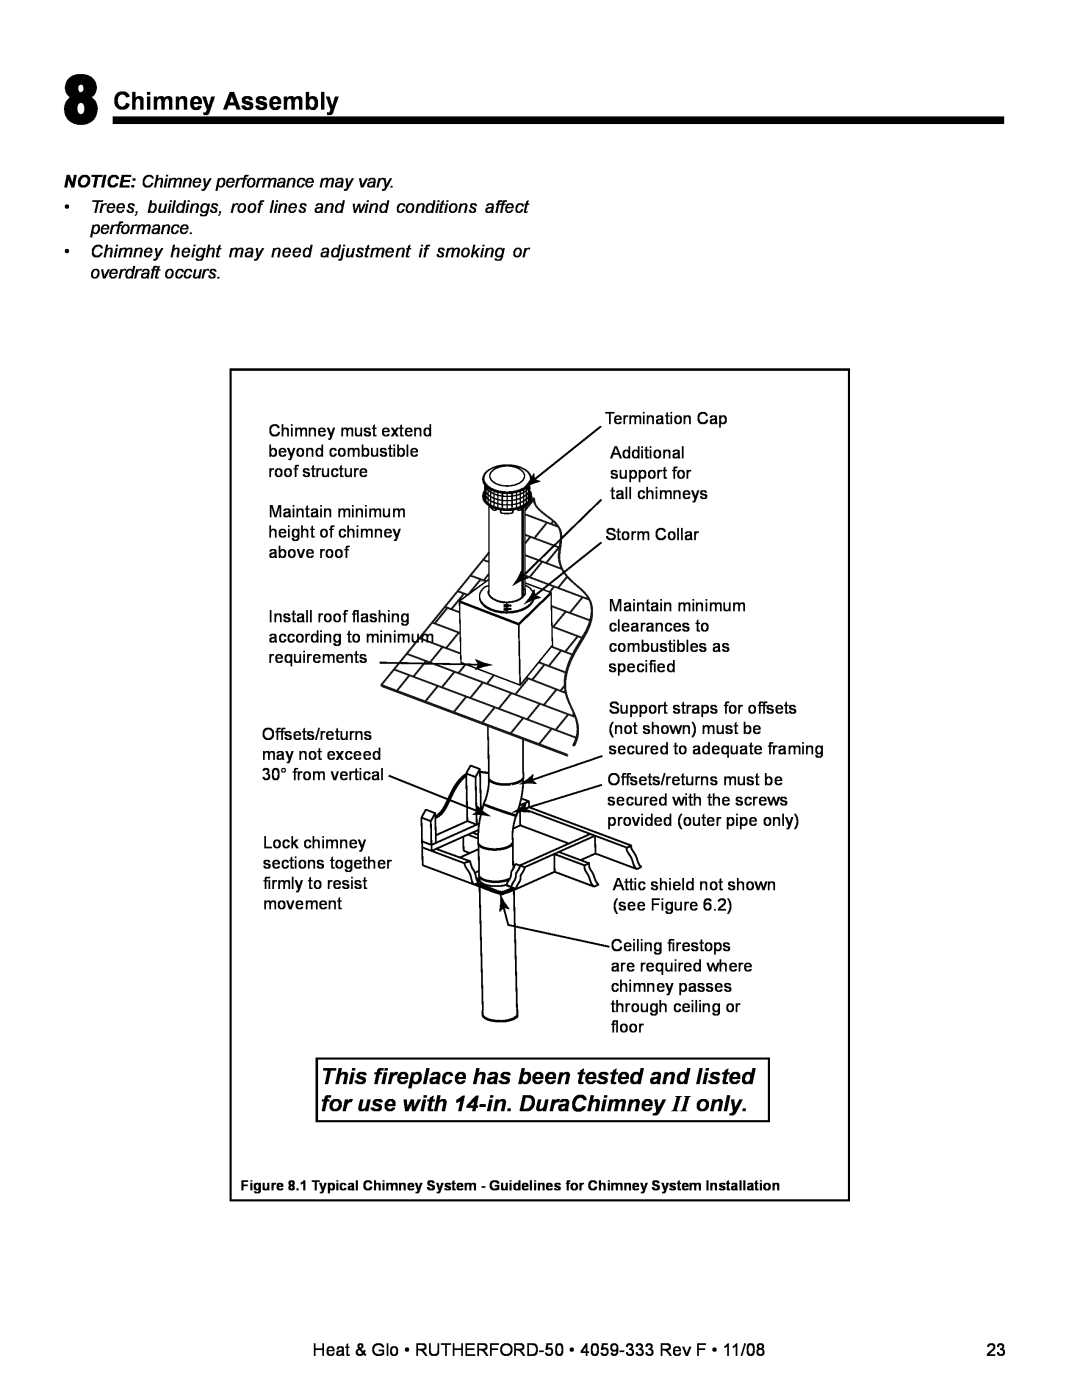 Hearth and Home Technologies RUTHERFORD-50 owner manual Chimney Assembly, NOTICE Chimney performance may vary 